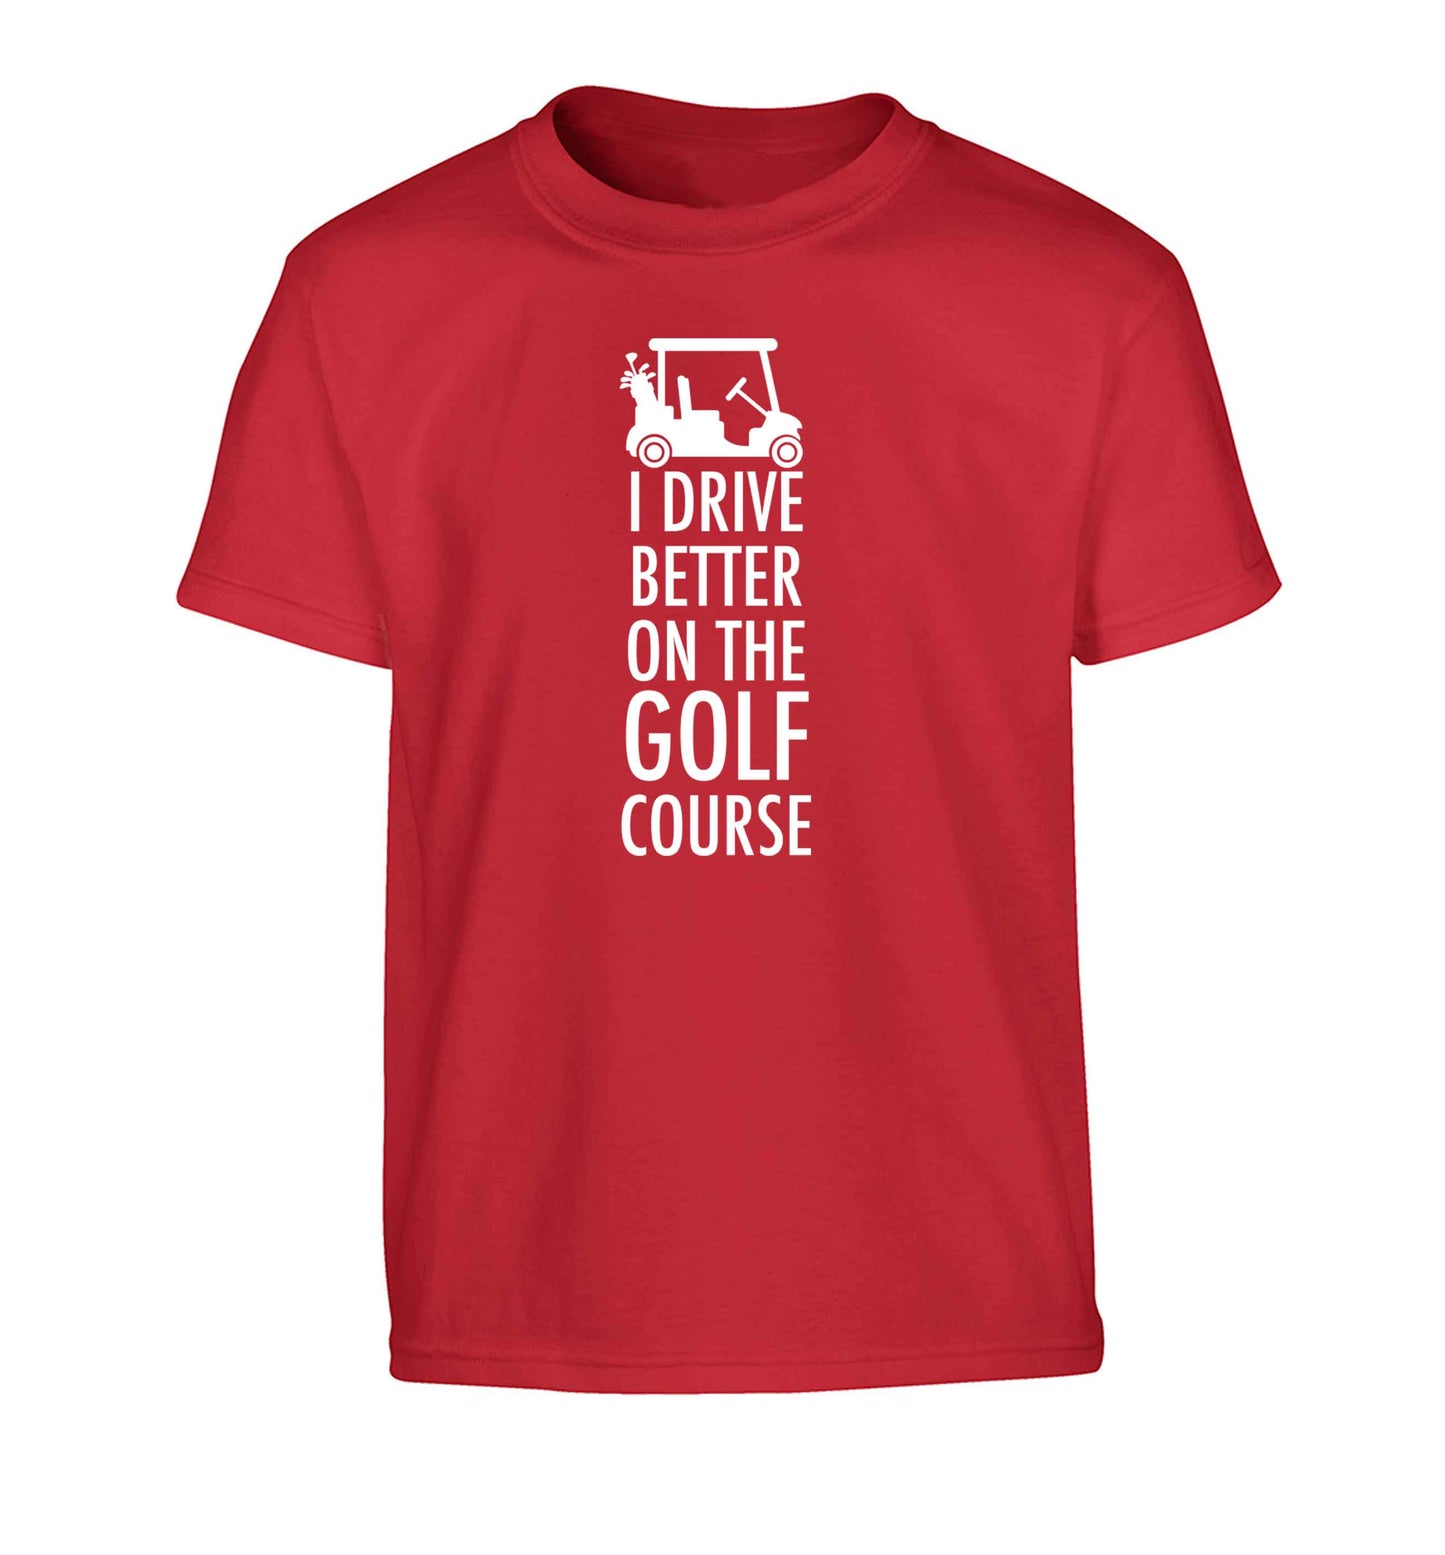 I drive better on the golf course Children's red Tshirt 12-13 Years